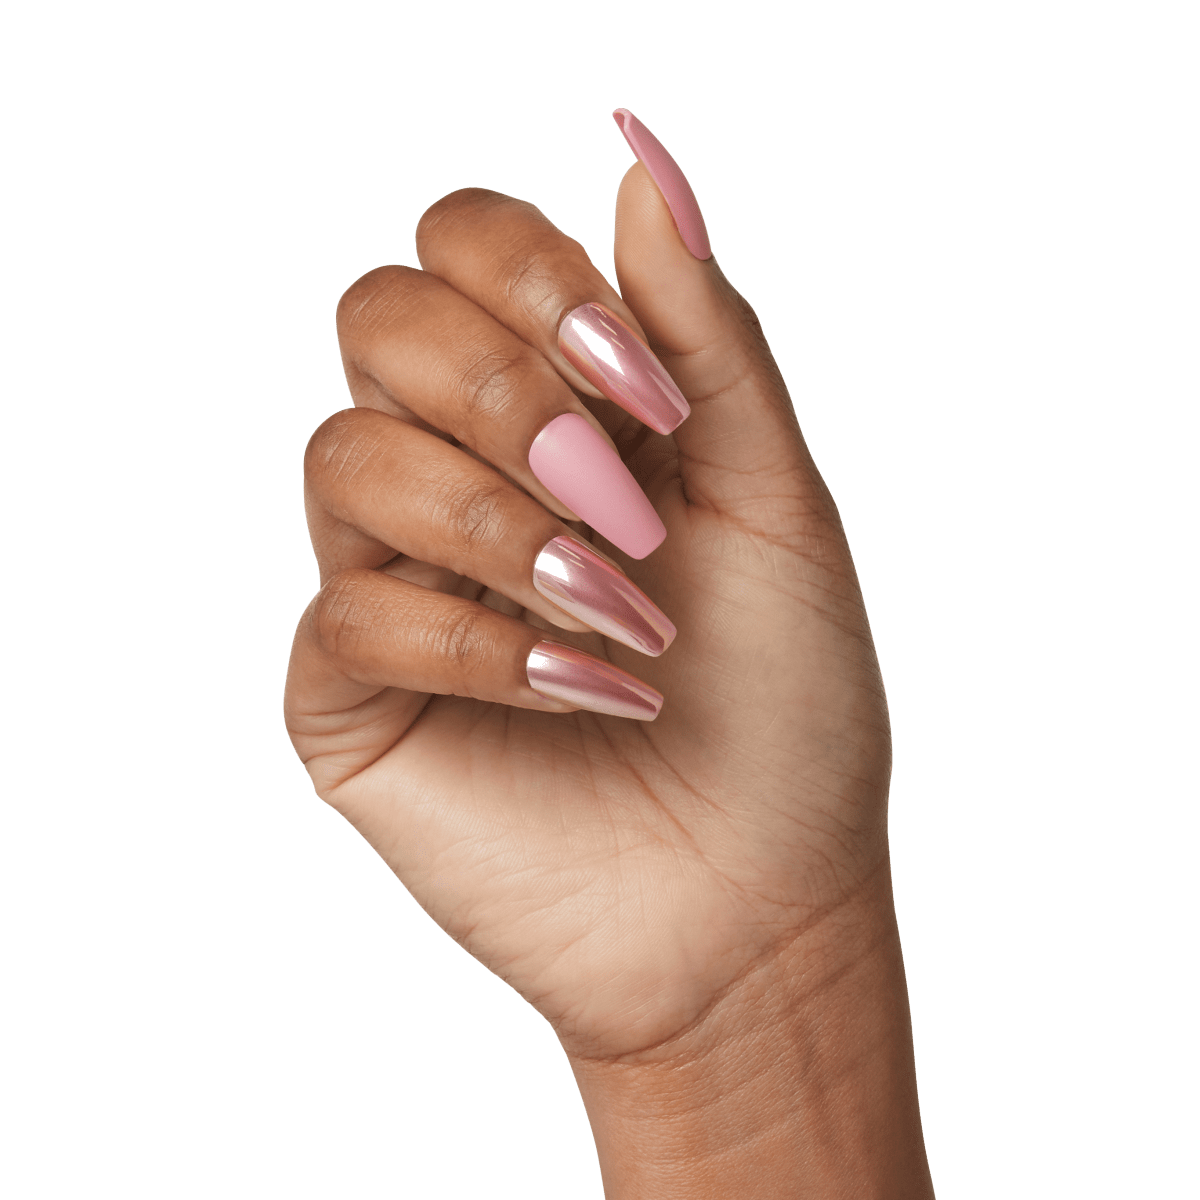 25+ Examples Of Square Nails & Why I Always Choose Square | Gorgeous nails,  Stylish nails art, Hot nails